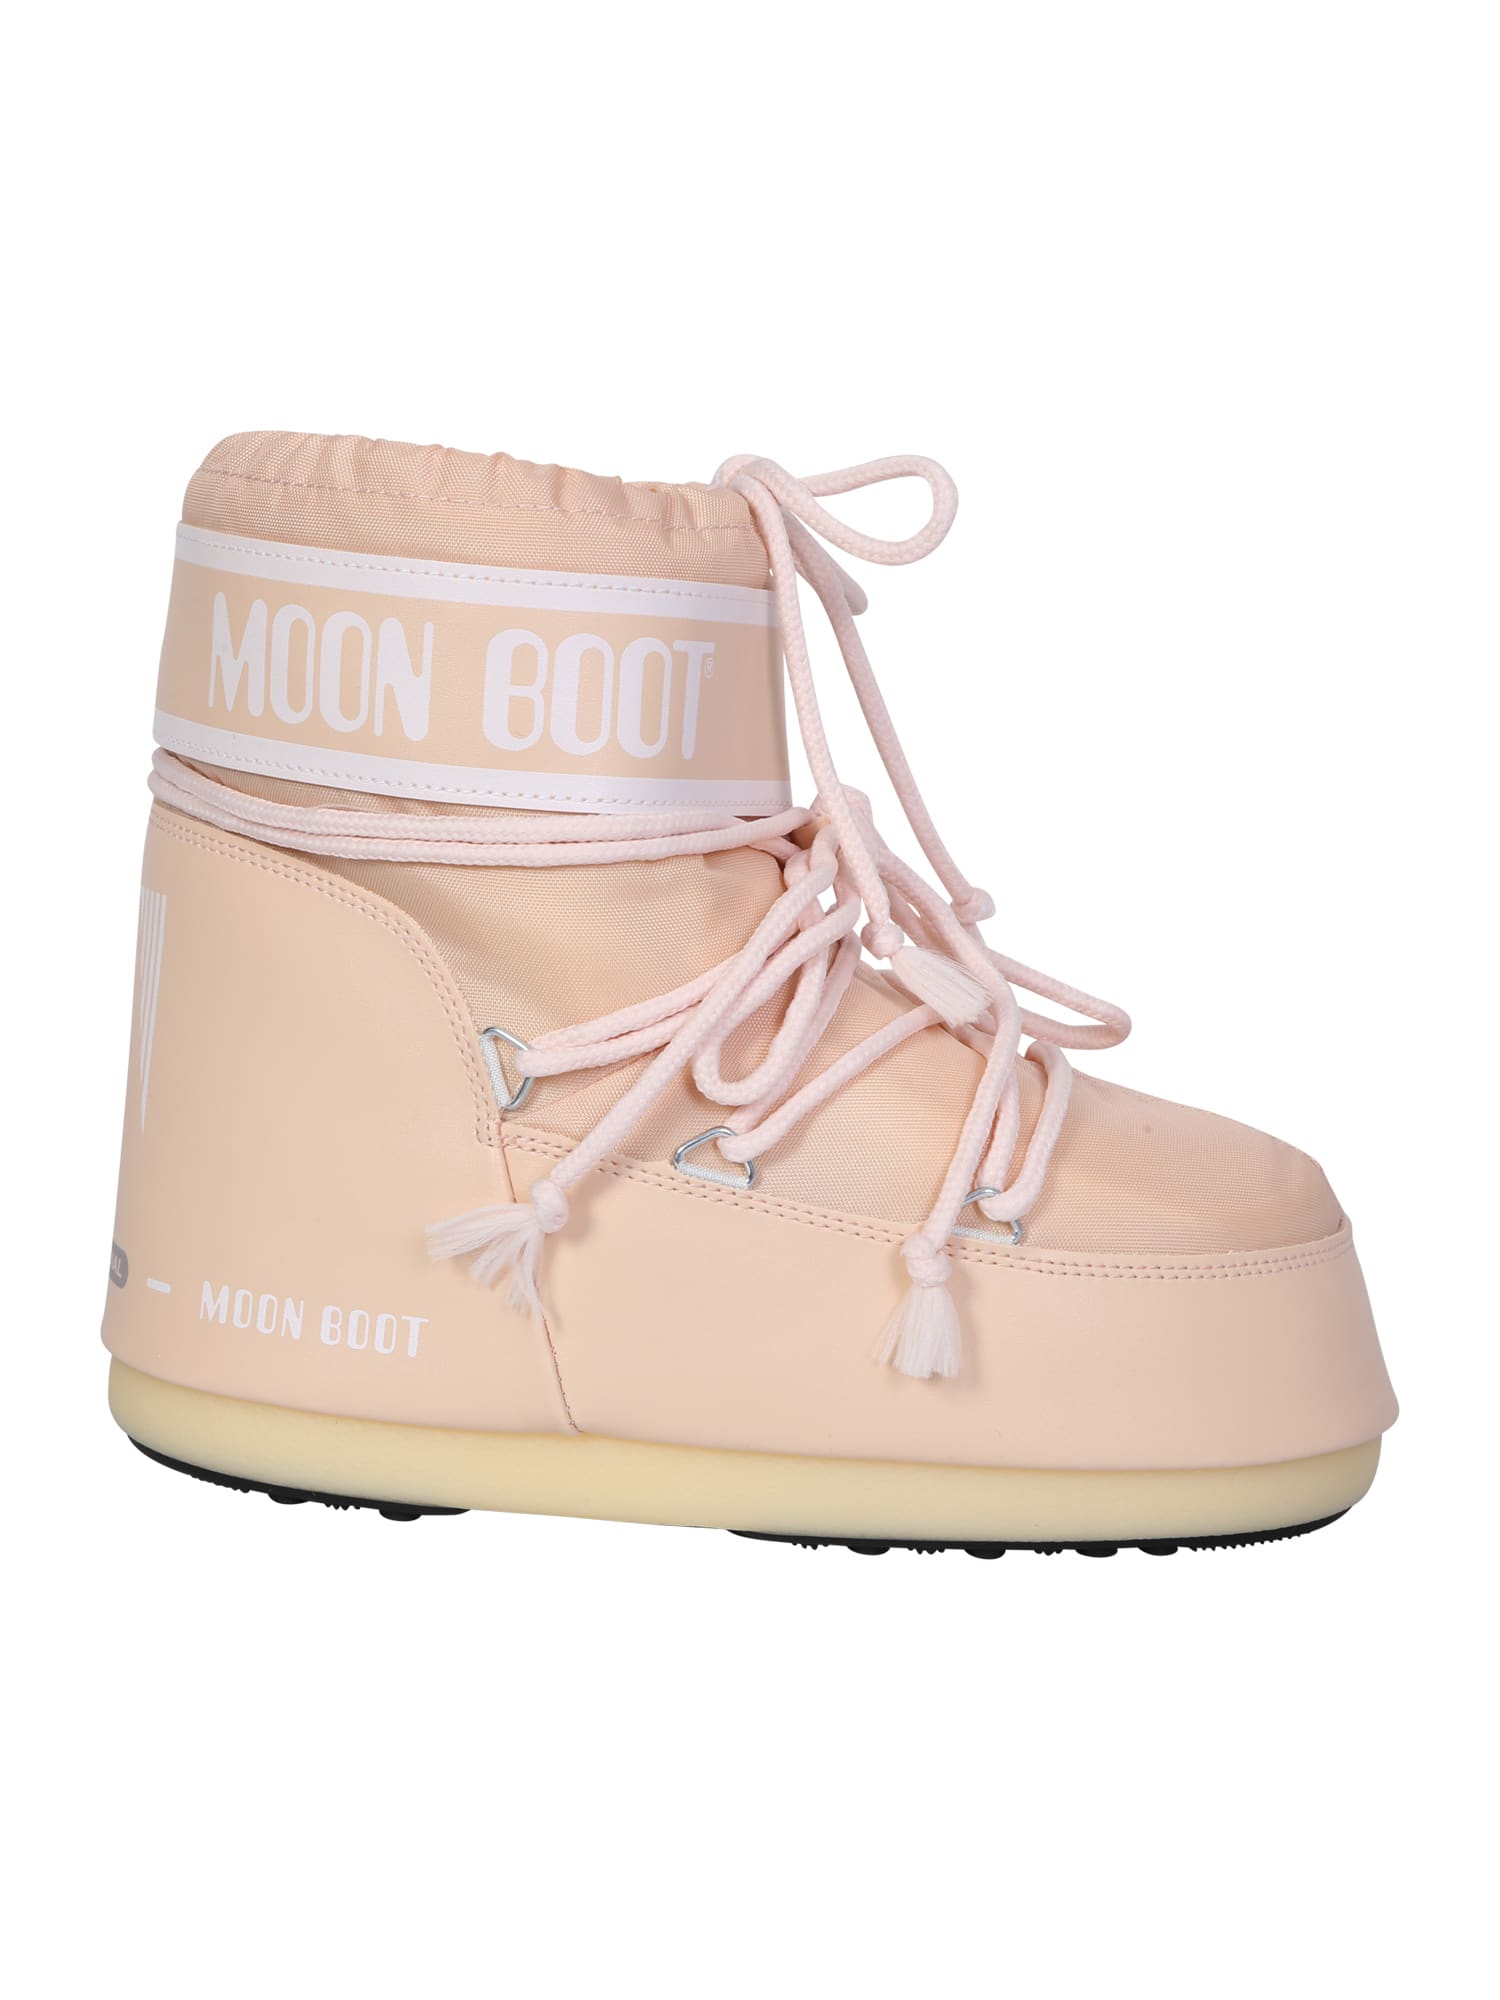 MOON BOOT ICON LOW ANKLE BOOTS